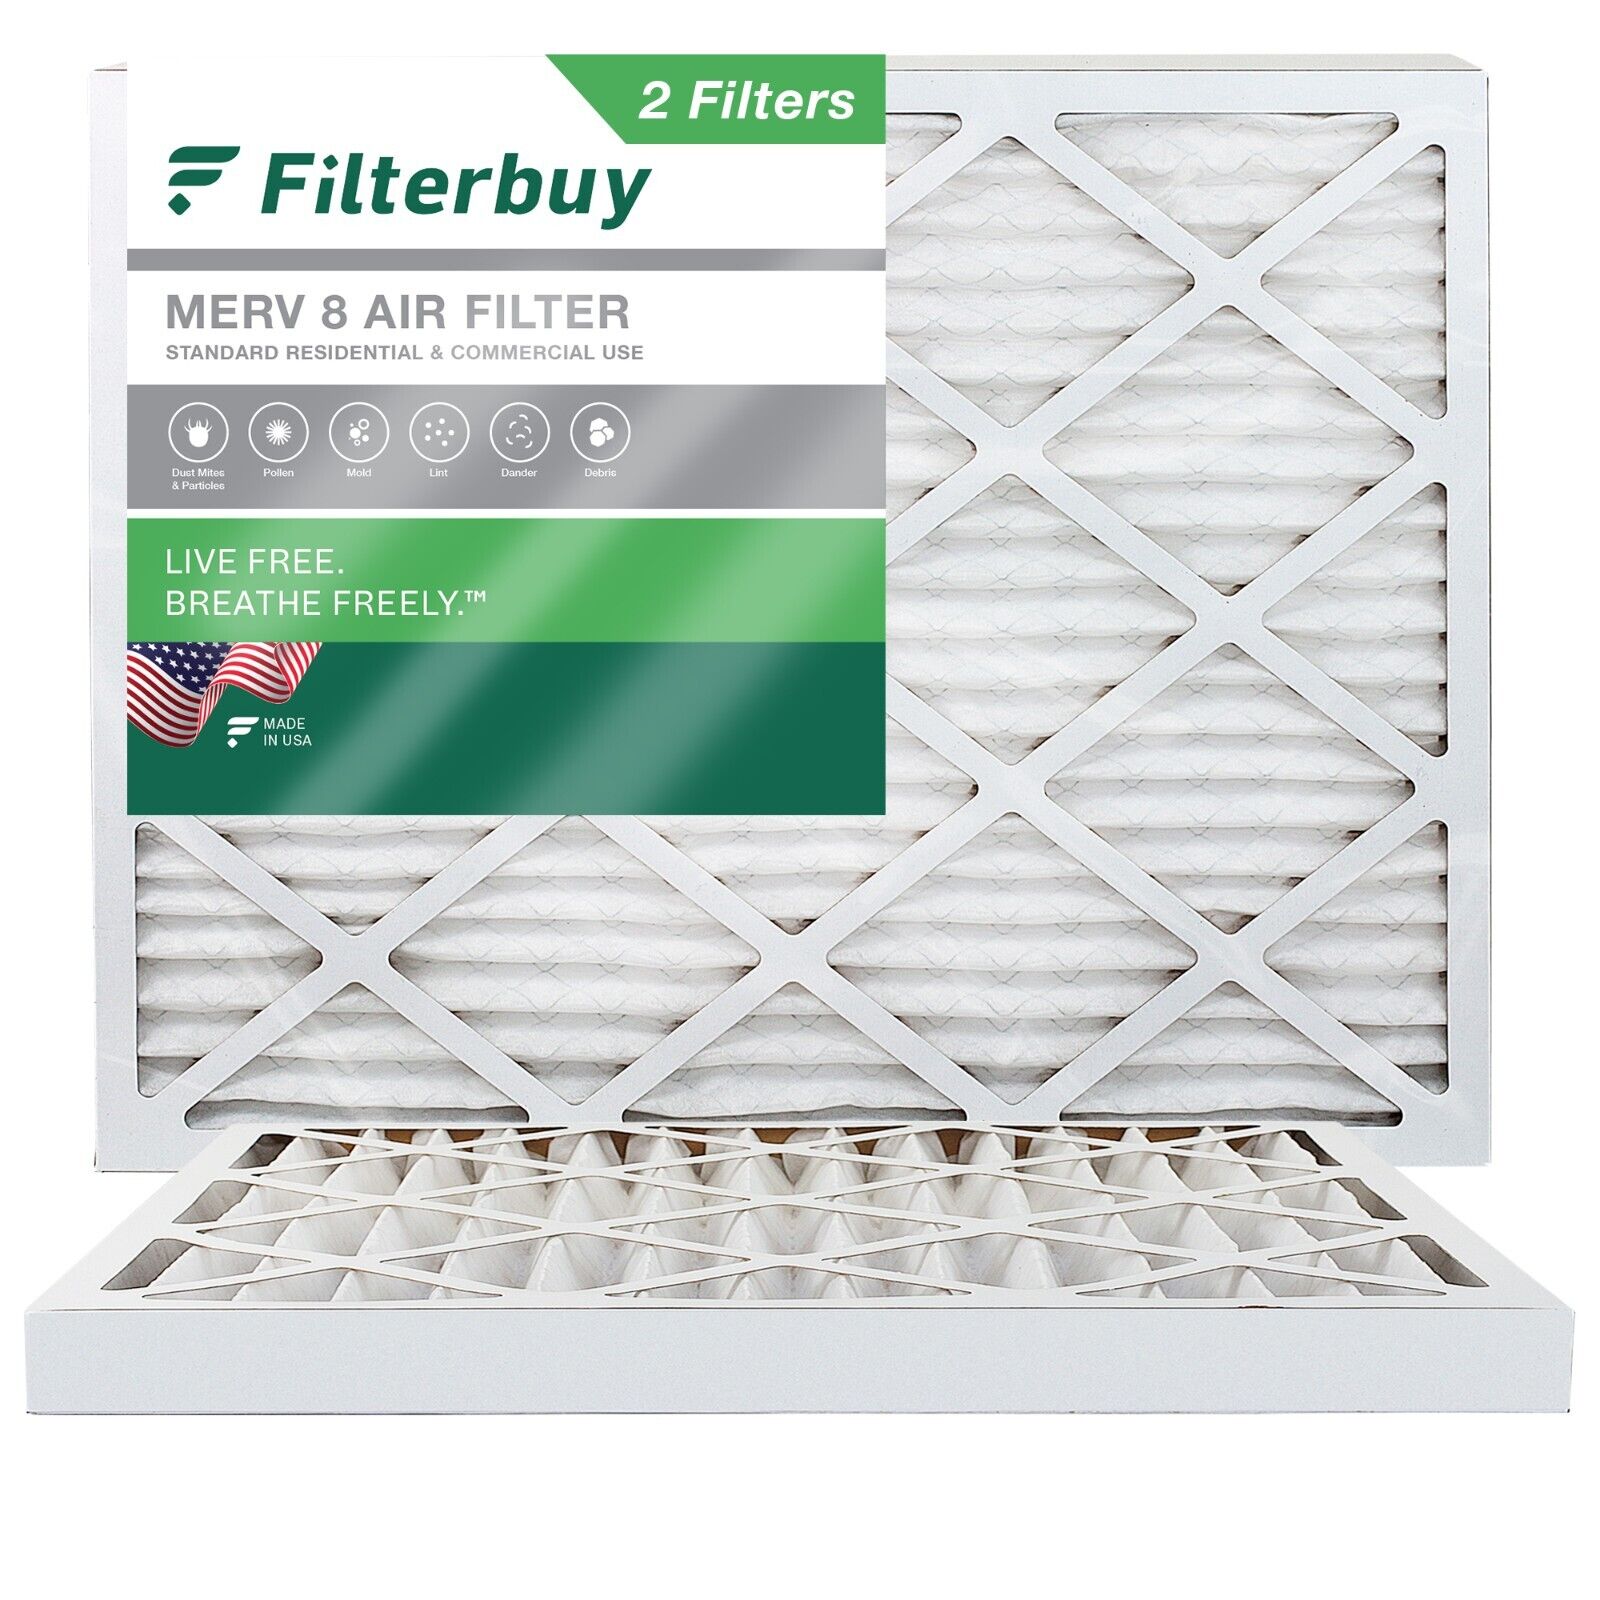 Filterbuy 16x20x2 Pleated Air Filters, Replacement for HVAC AC Furnace (MERV 8)